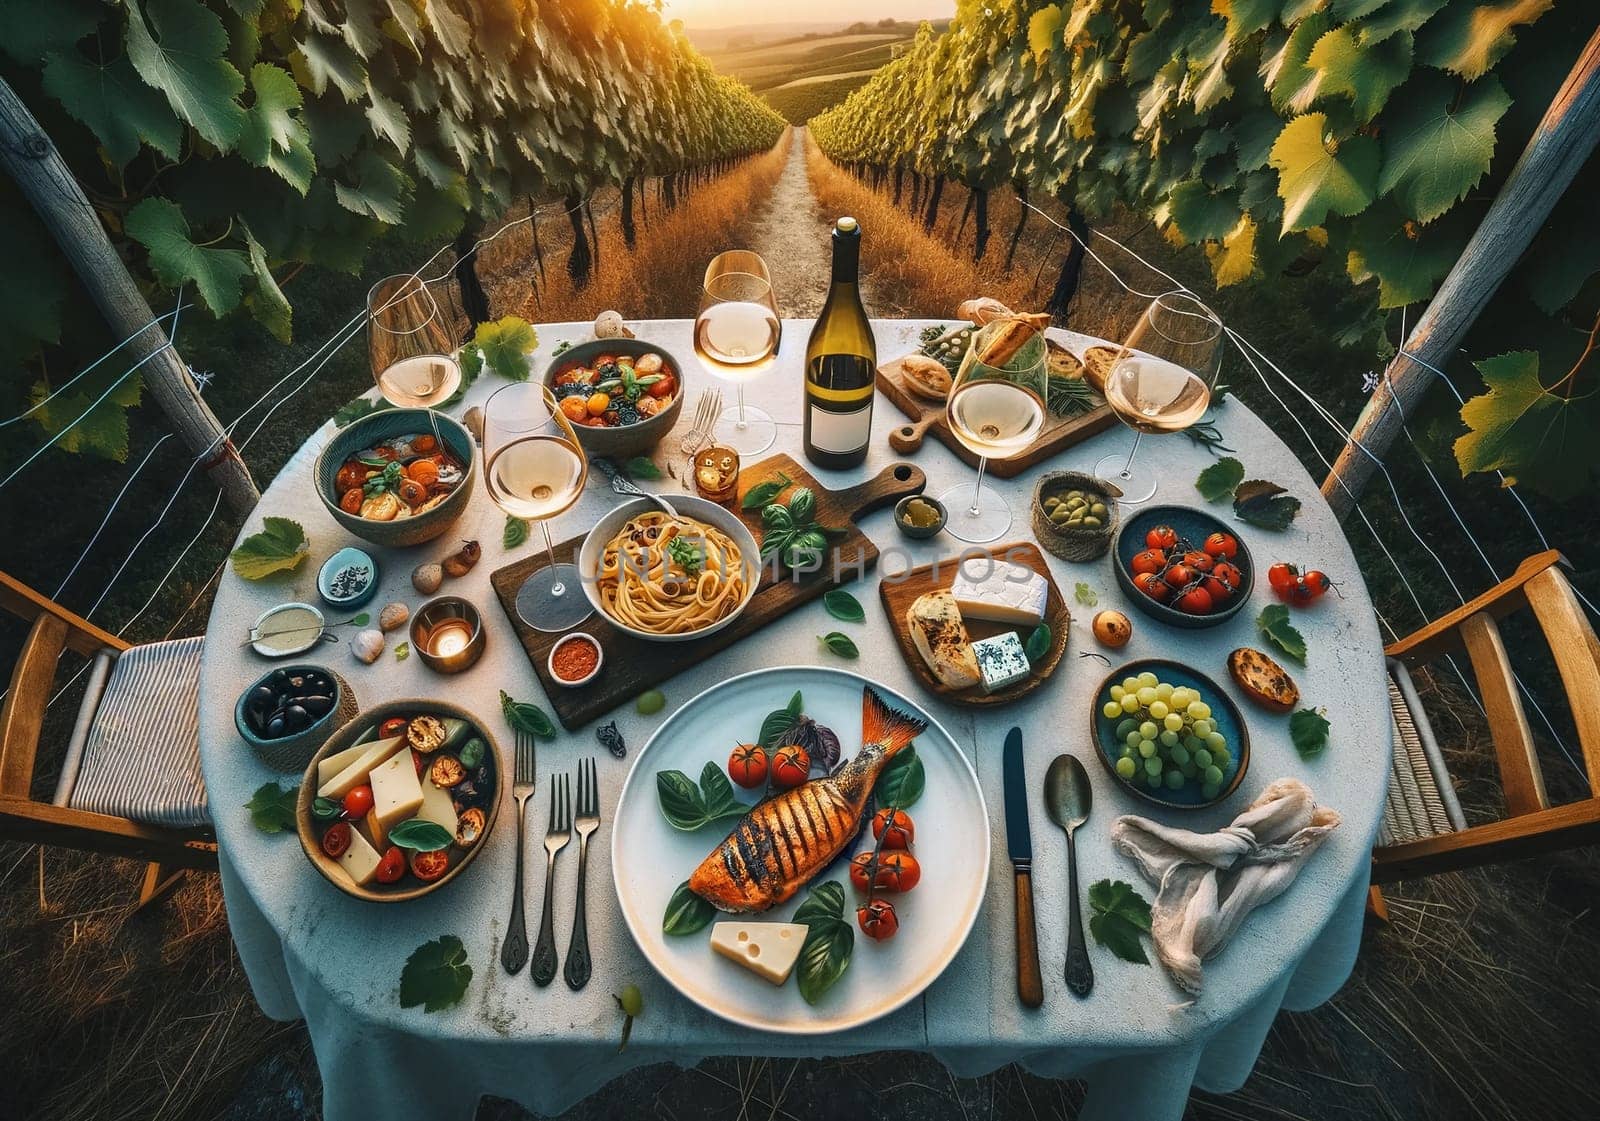 Top-down view of a summer evening dinner in a vineyard, featuring grilled fish, tomato and basil pasta, cheese and olive platter, and white wine, set during sunset by Nadtochiy